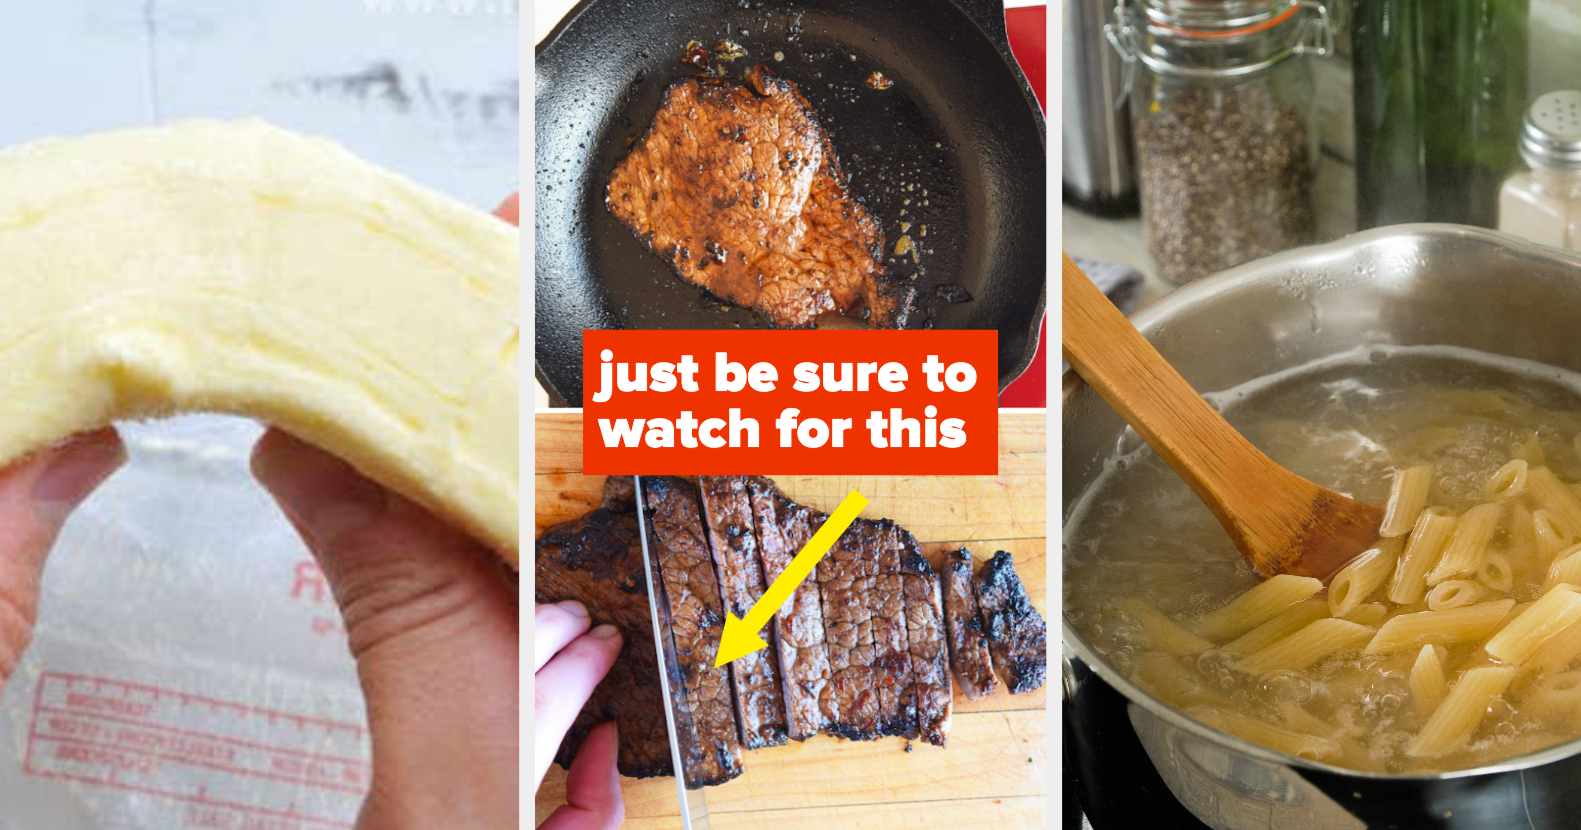 Cook Like a Pro: Banish Your Salt Shaker from the Kitchen